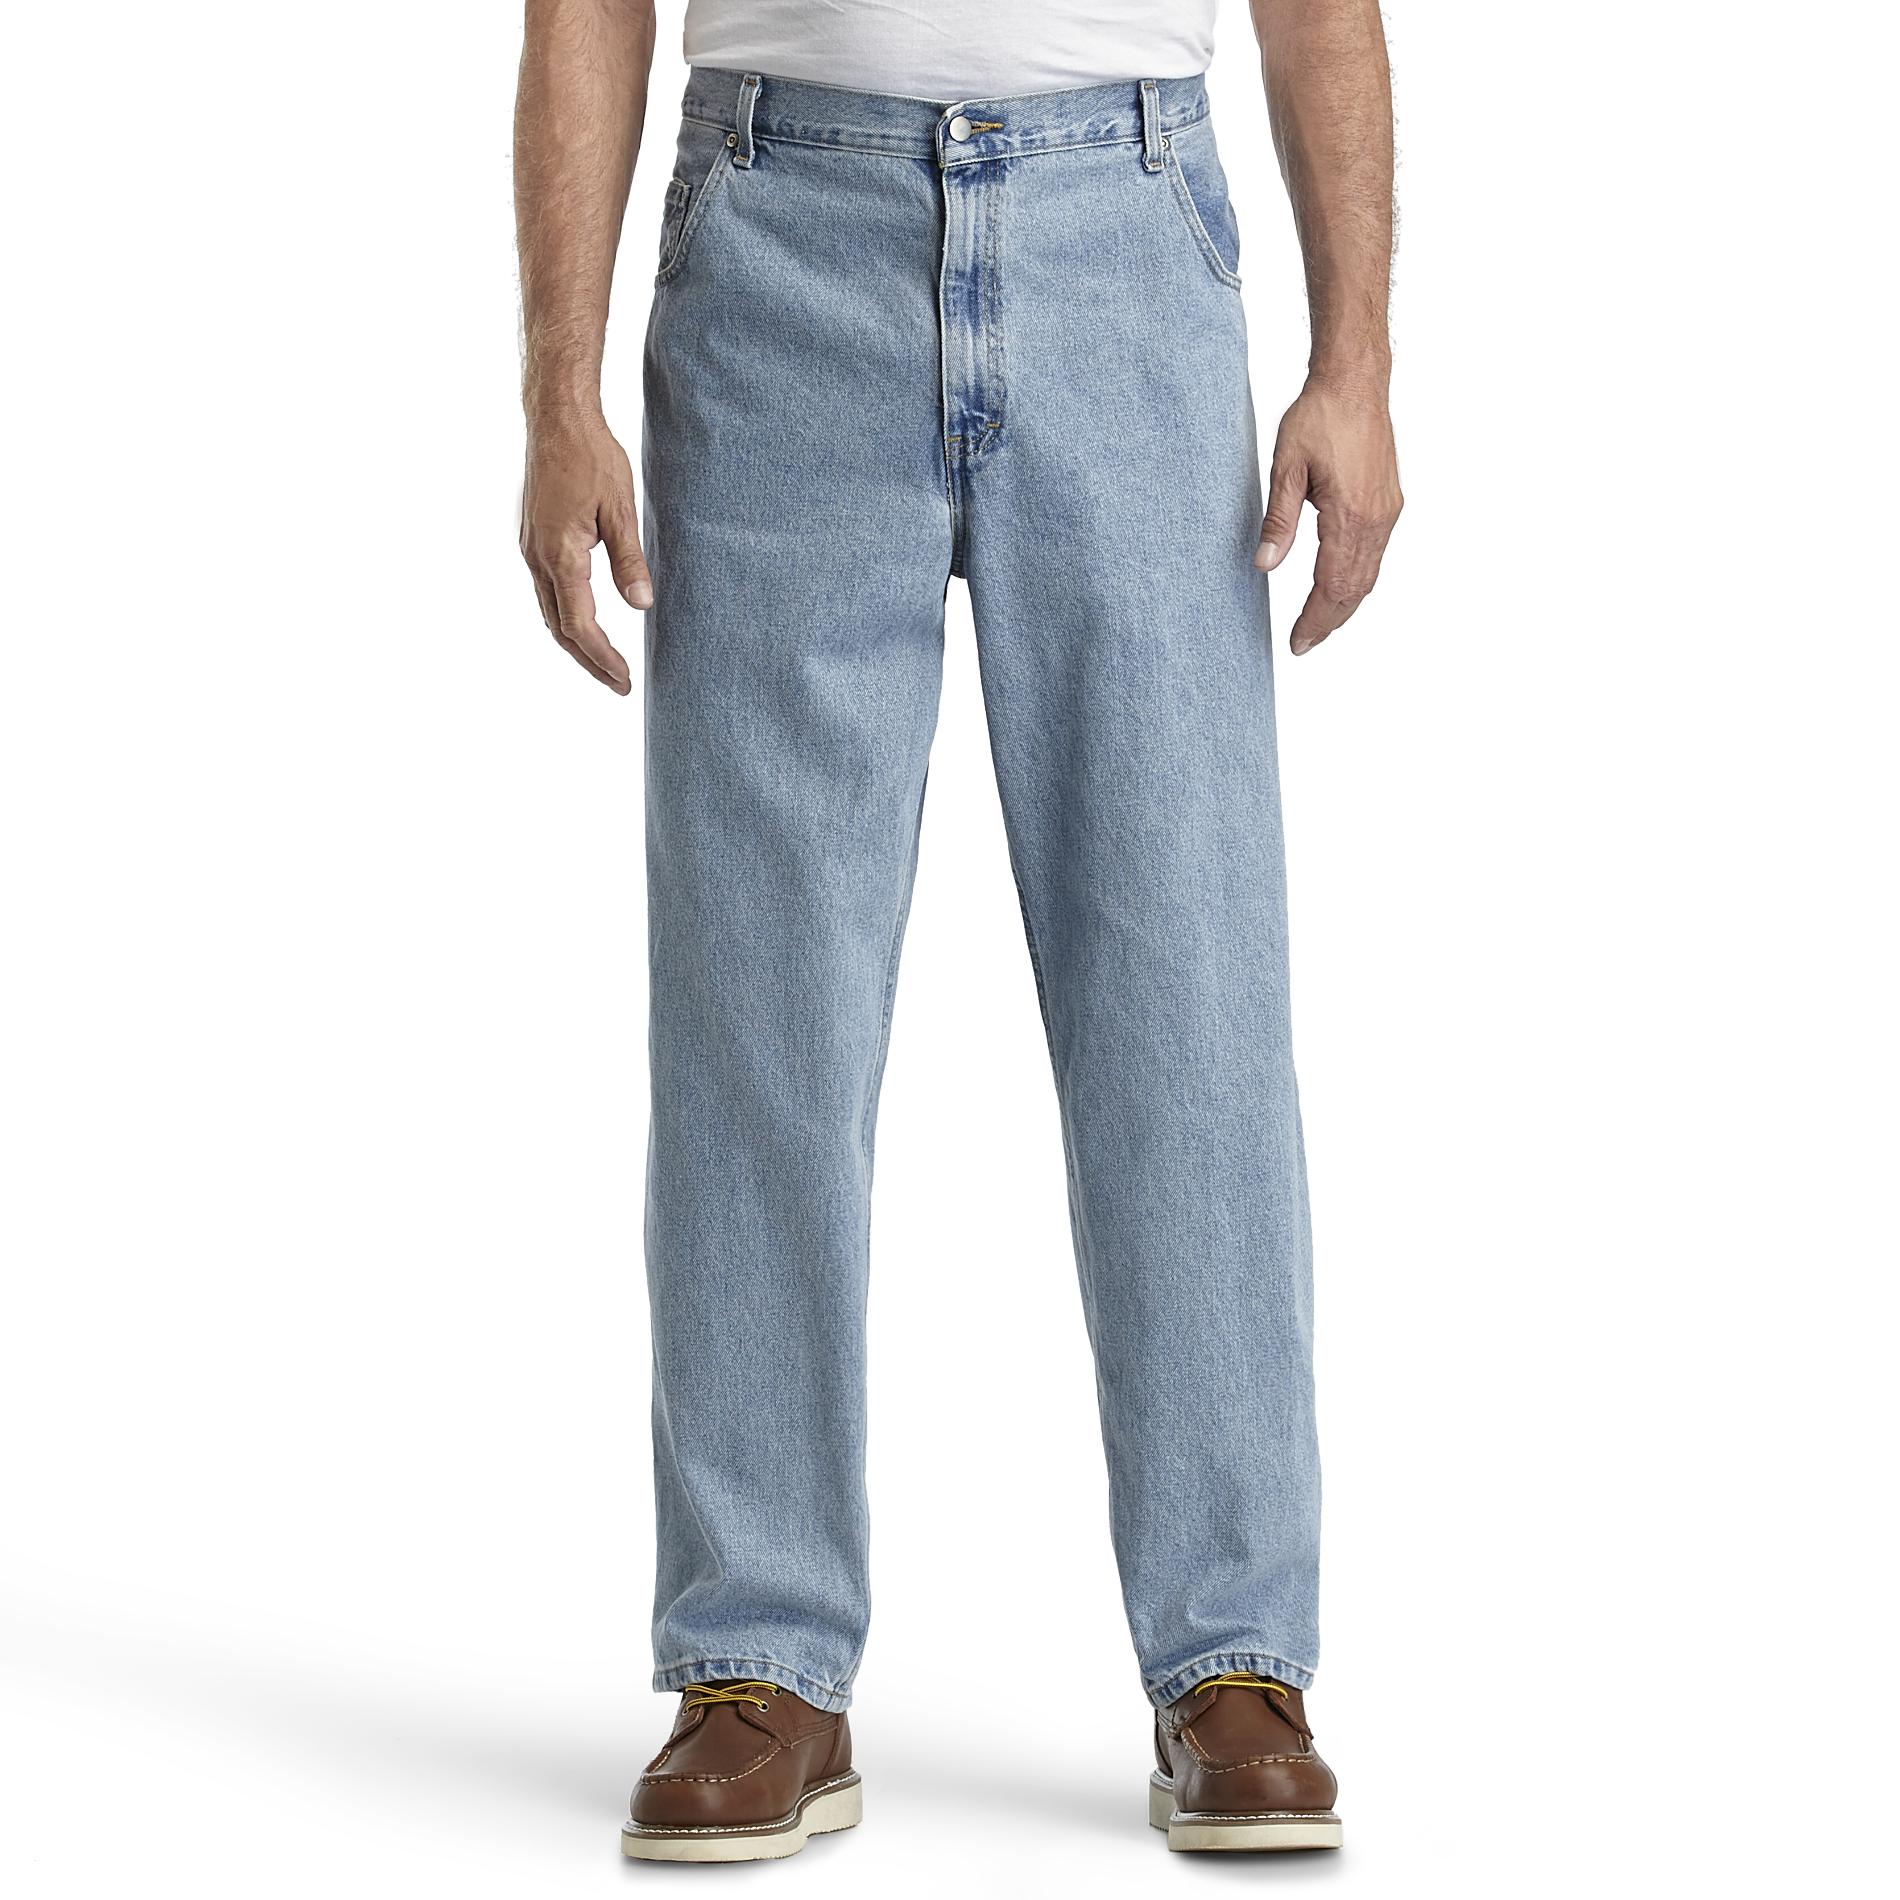 Note: What To Look For When Buying Mens Jeans